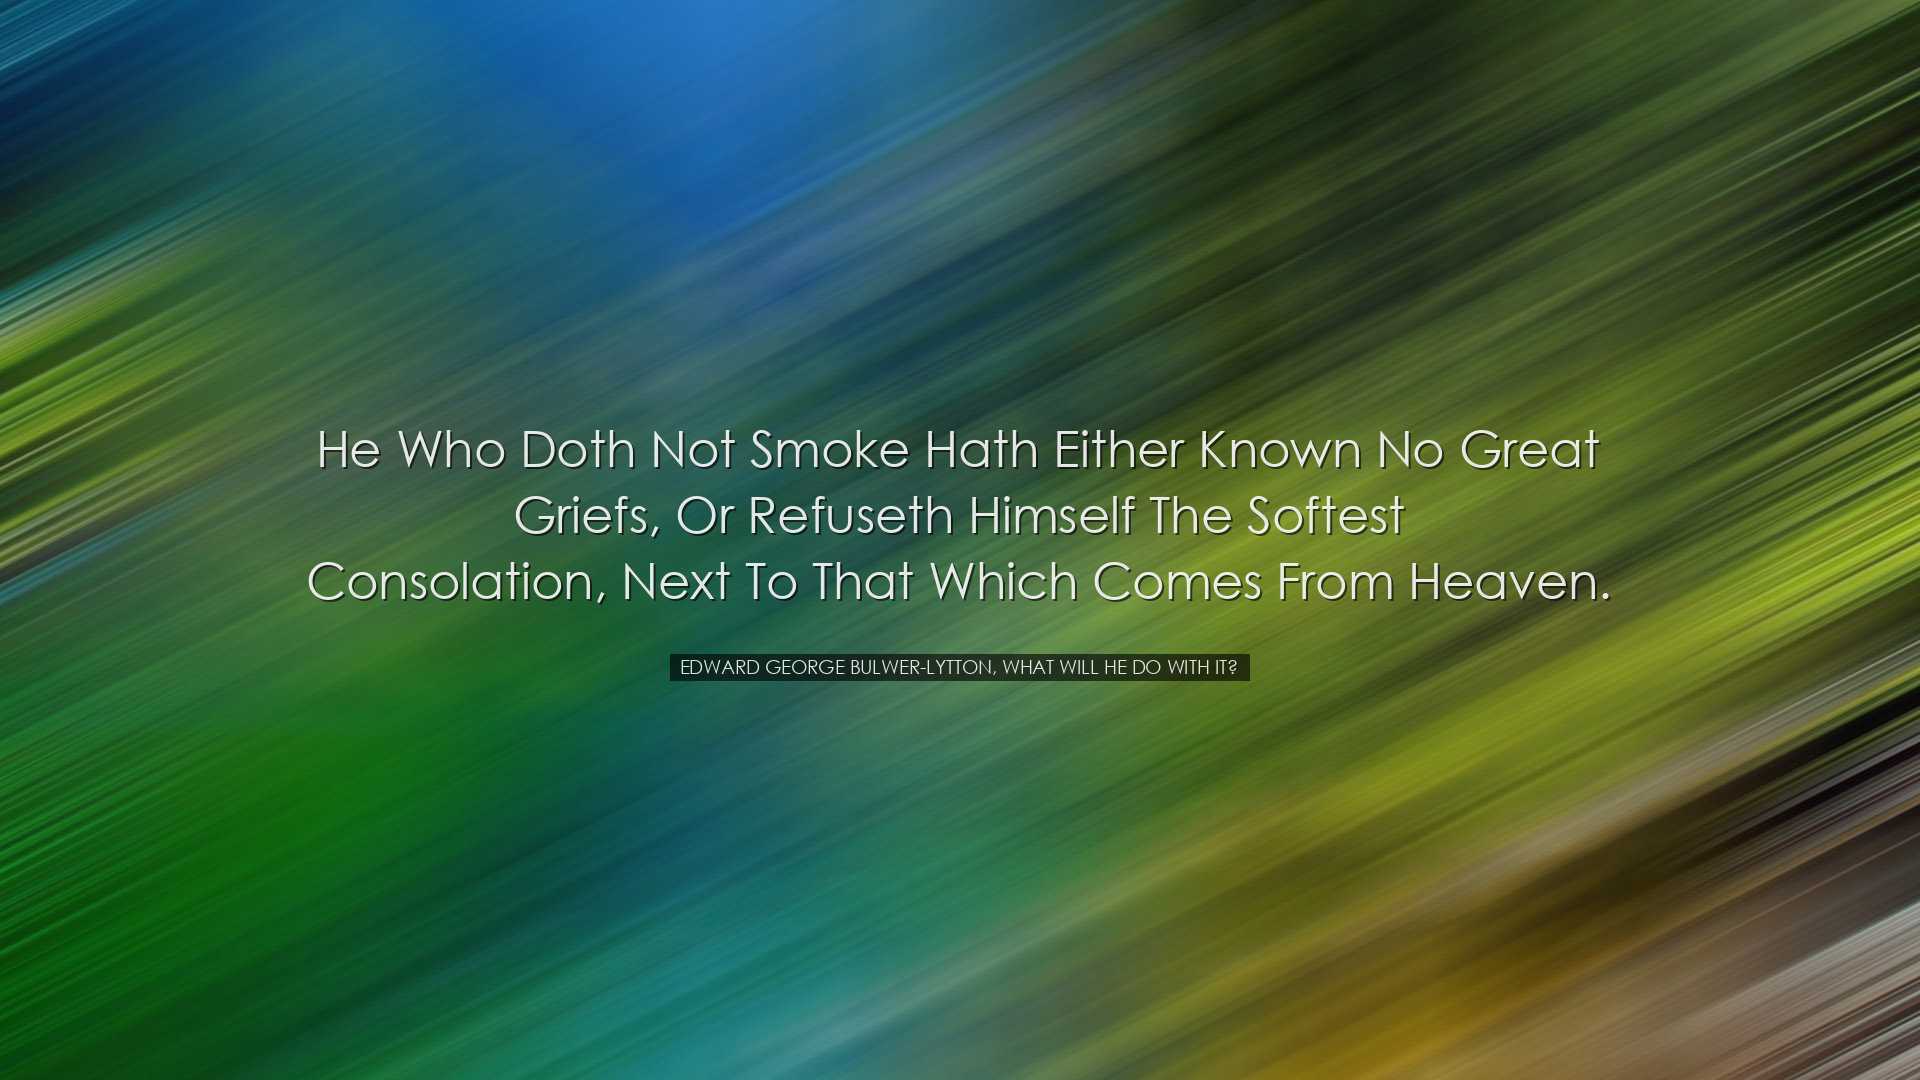 He who doth not smoke hath either known no great griefs, or refuse